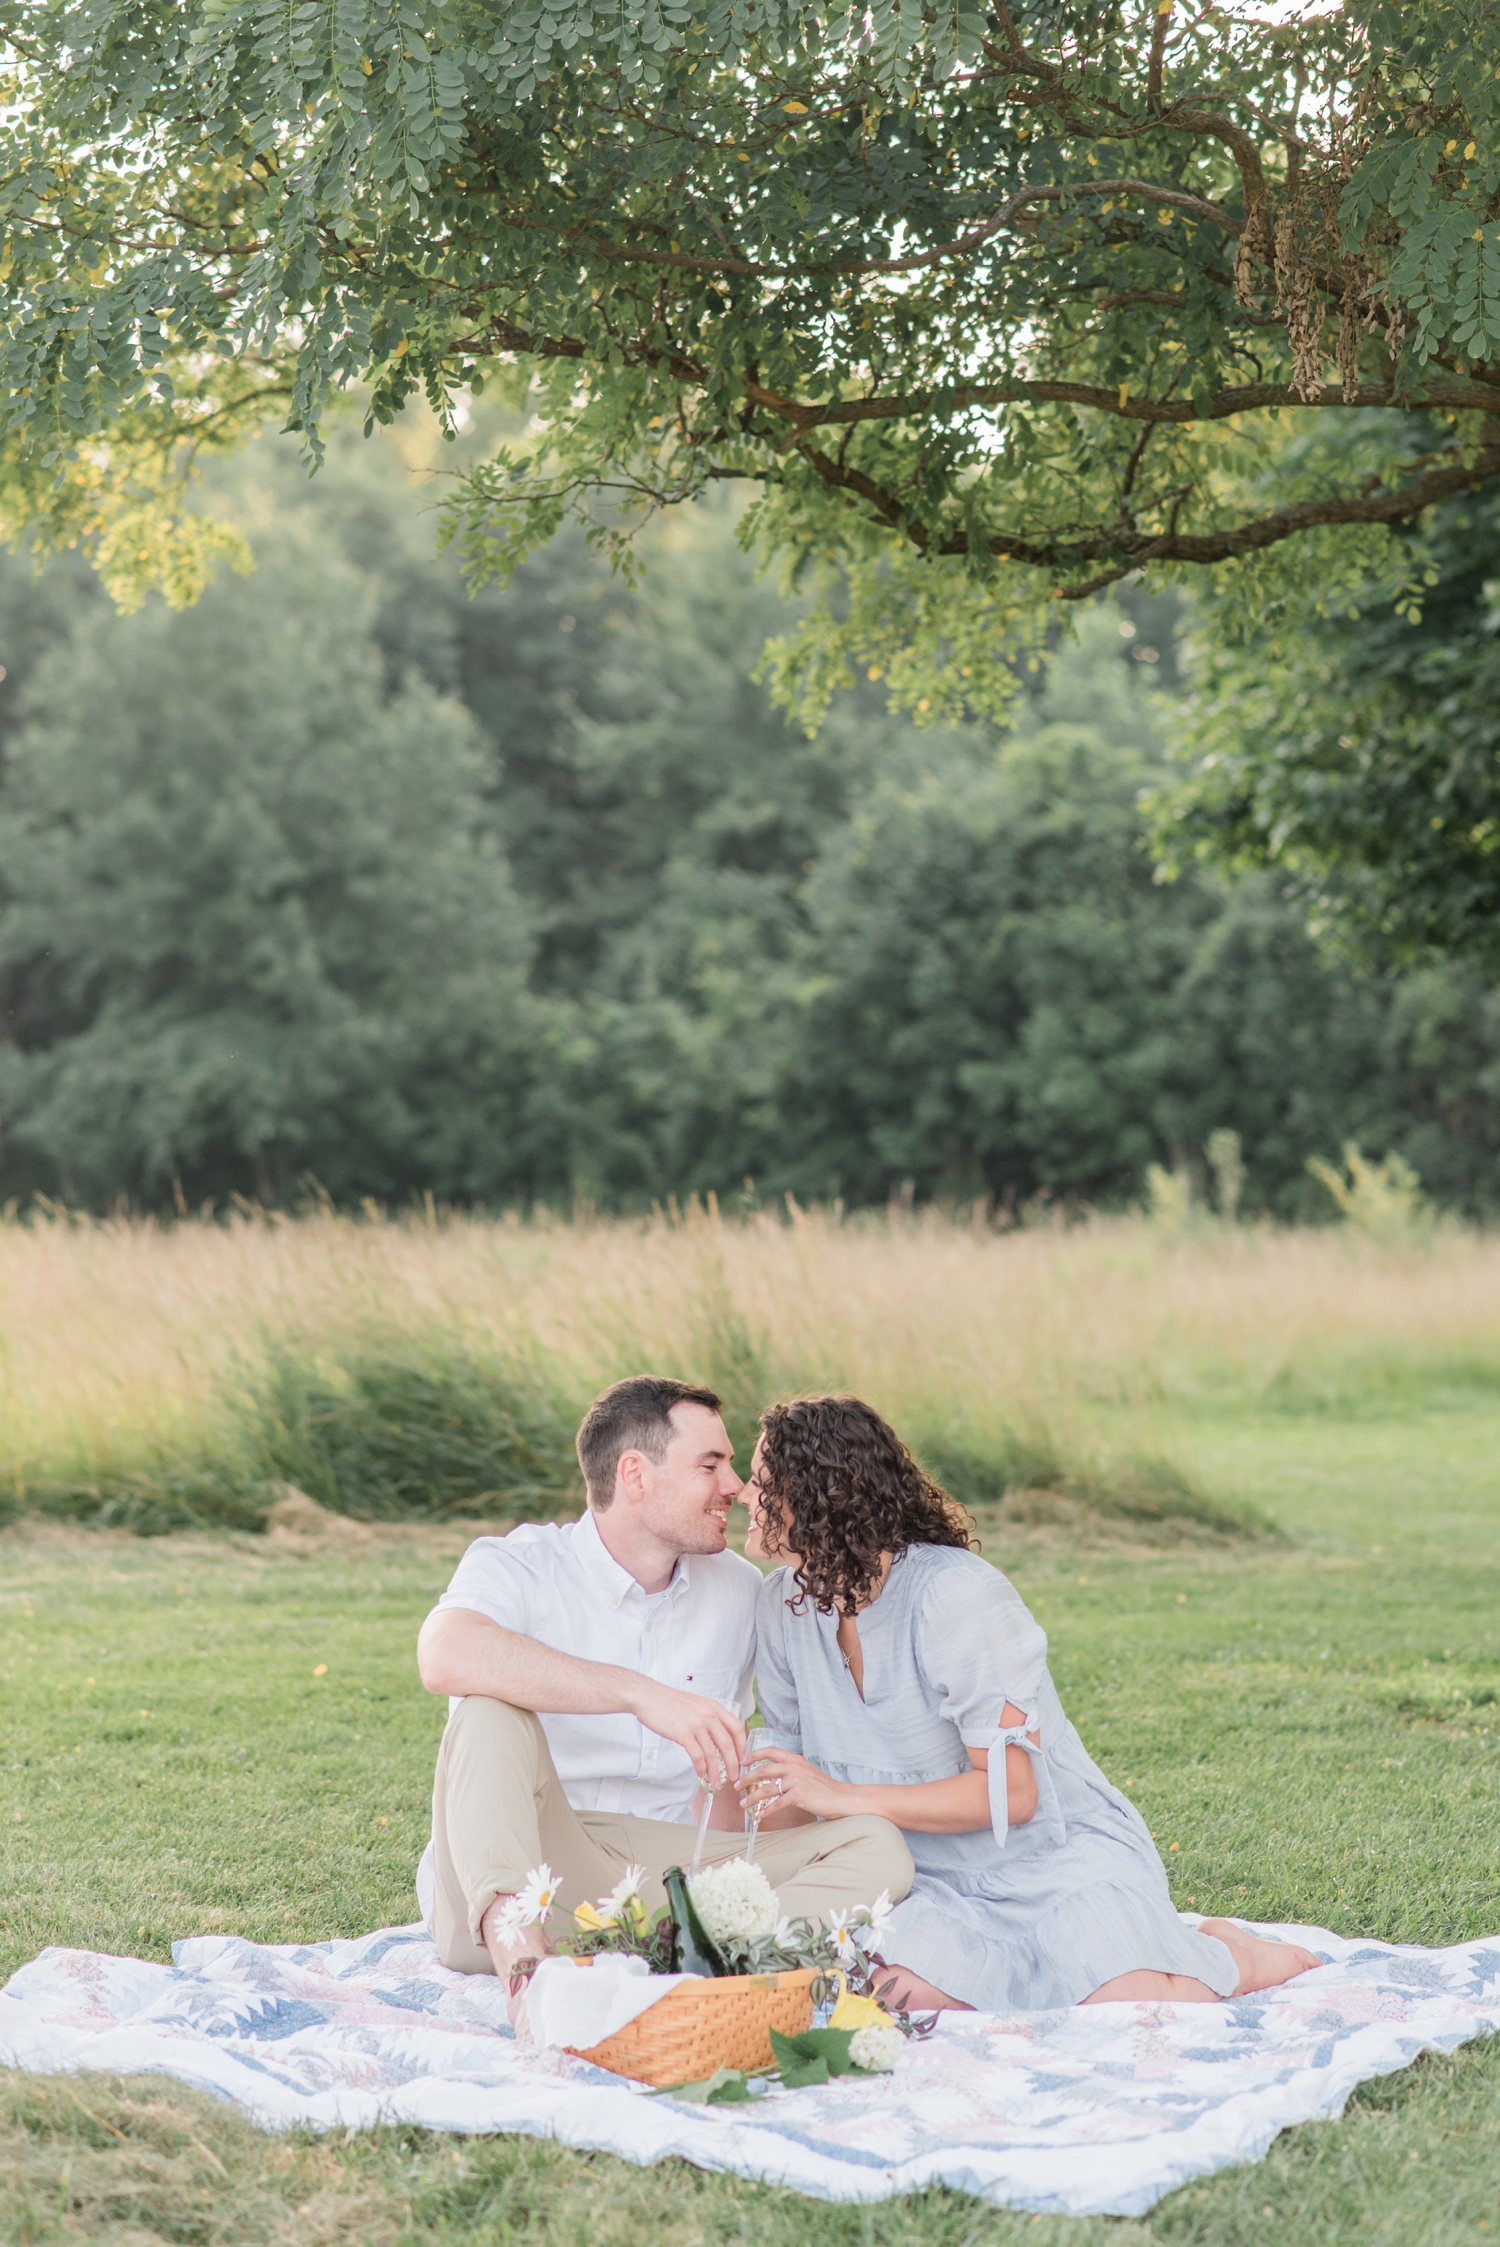 photo of engaged couple at Sunset Picnic Engagement Session at Metea Park by Courtney Rudicel, a wedding photographer in Indiana